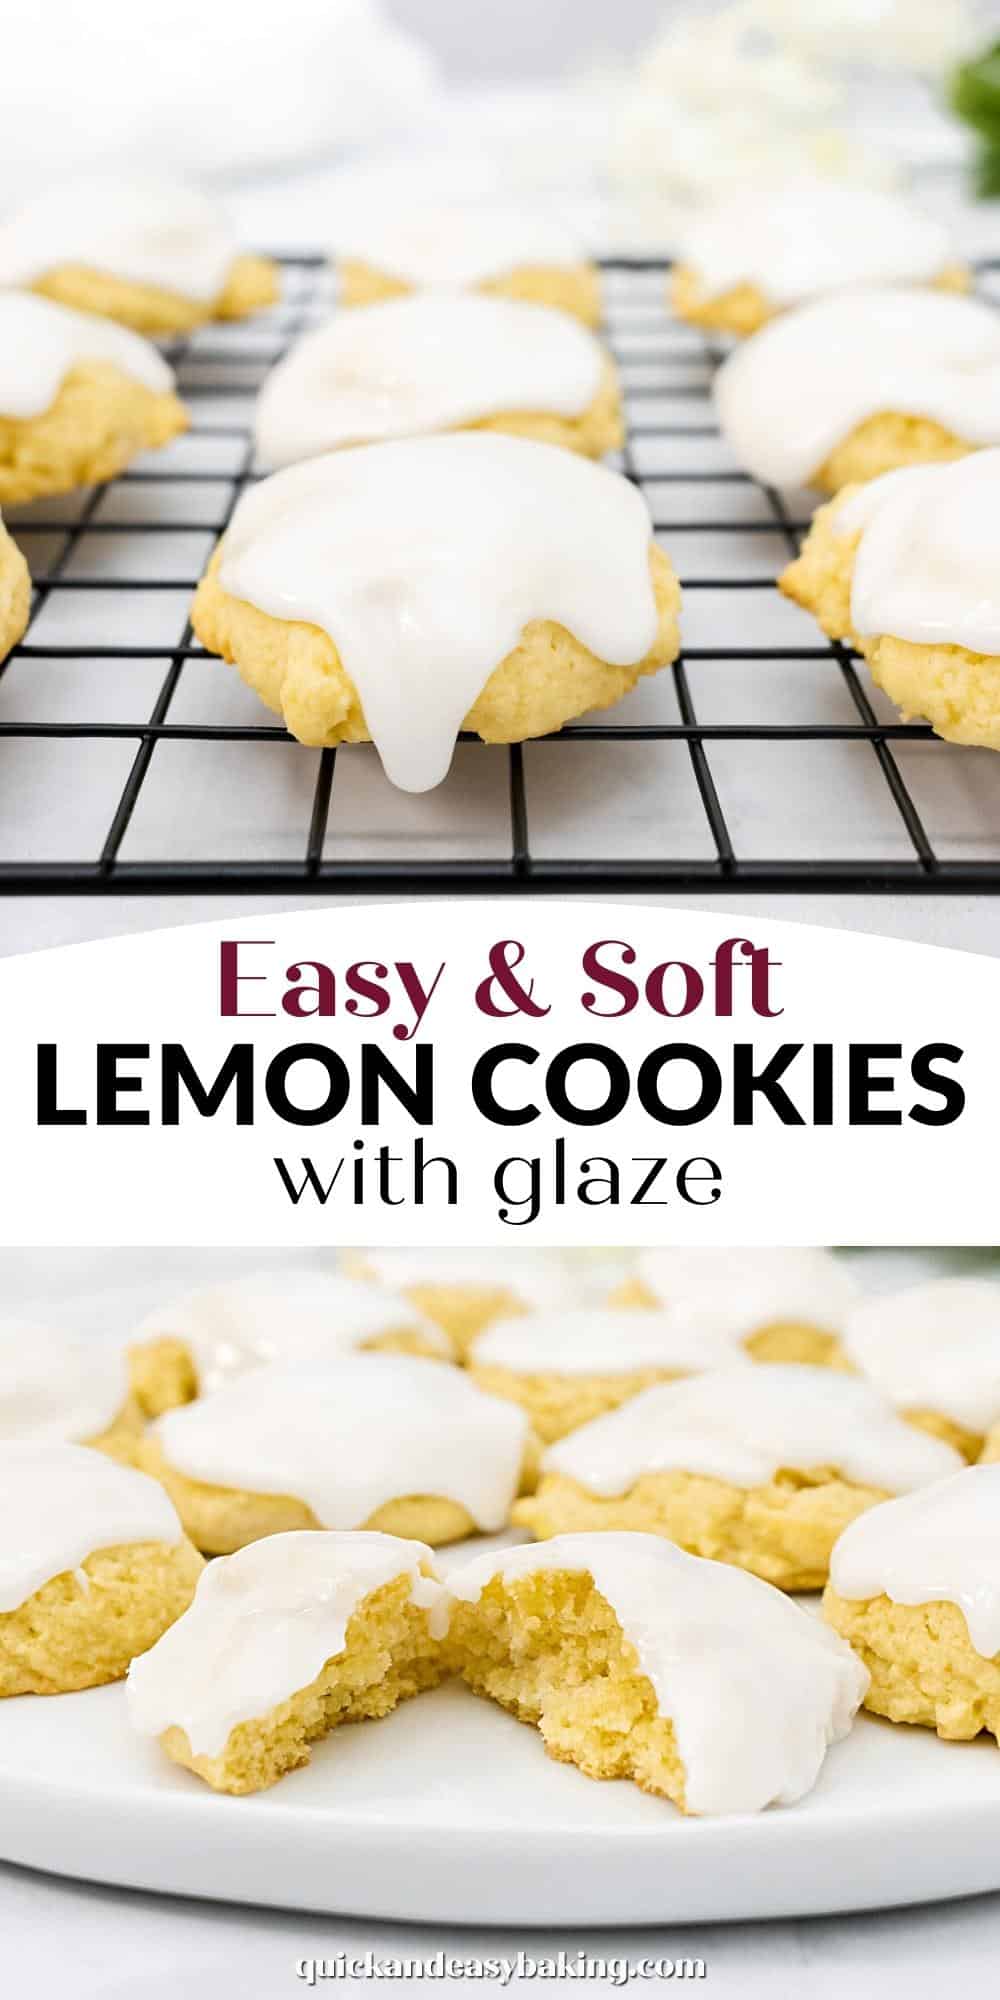 Cookies with lemon glaze on a baking rack with text overlay.